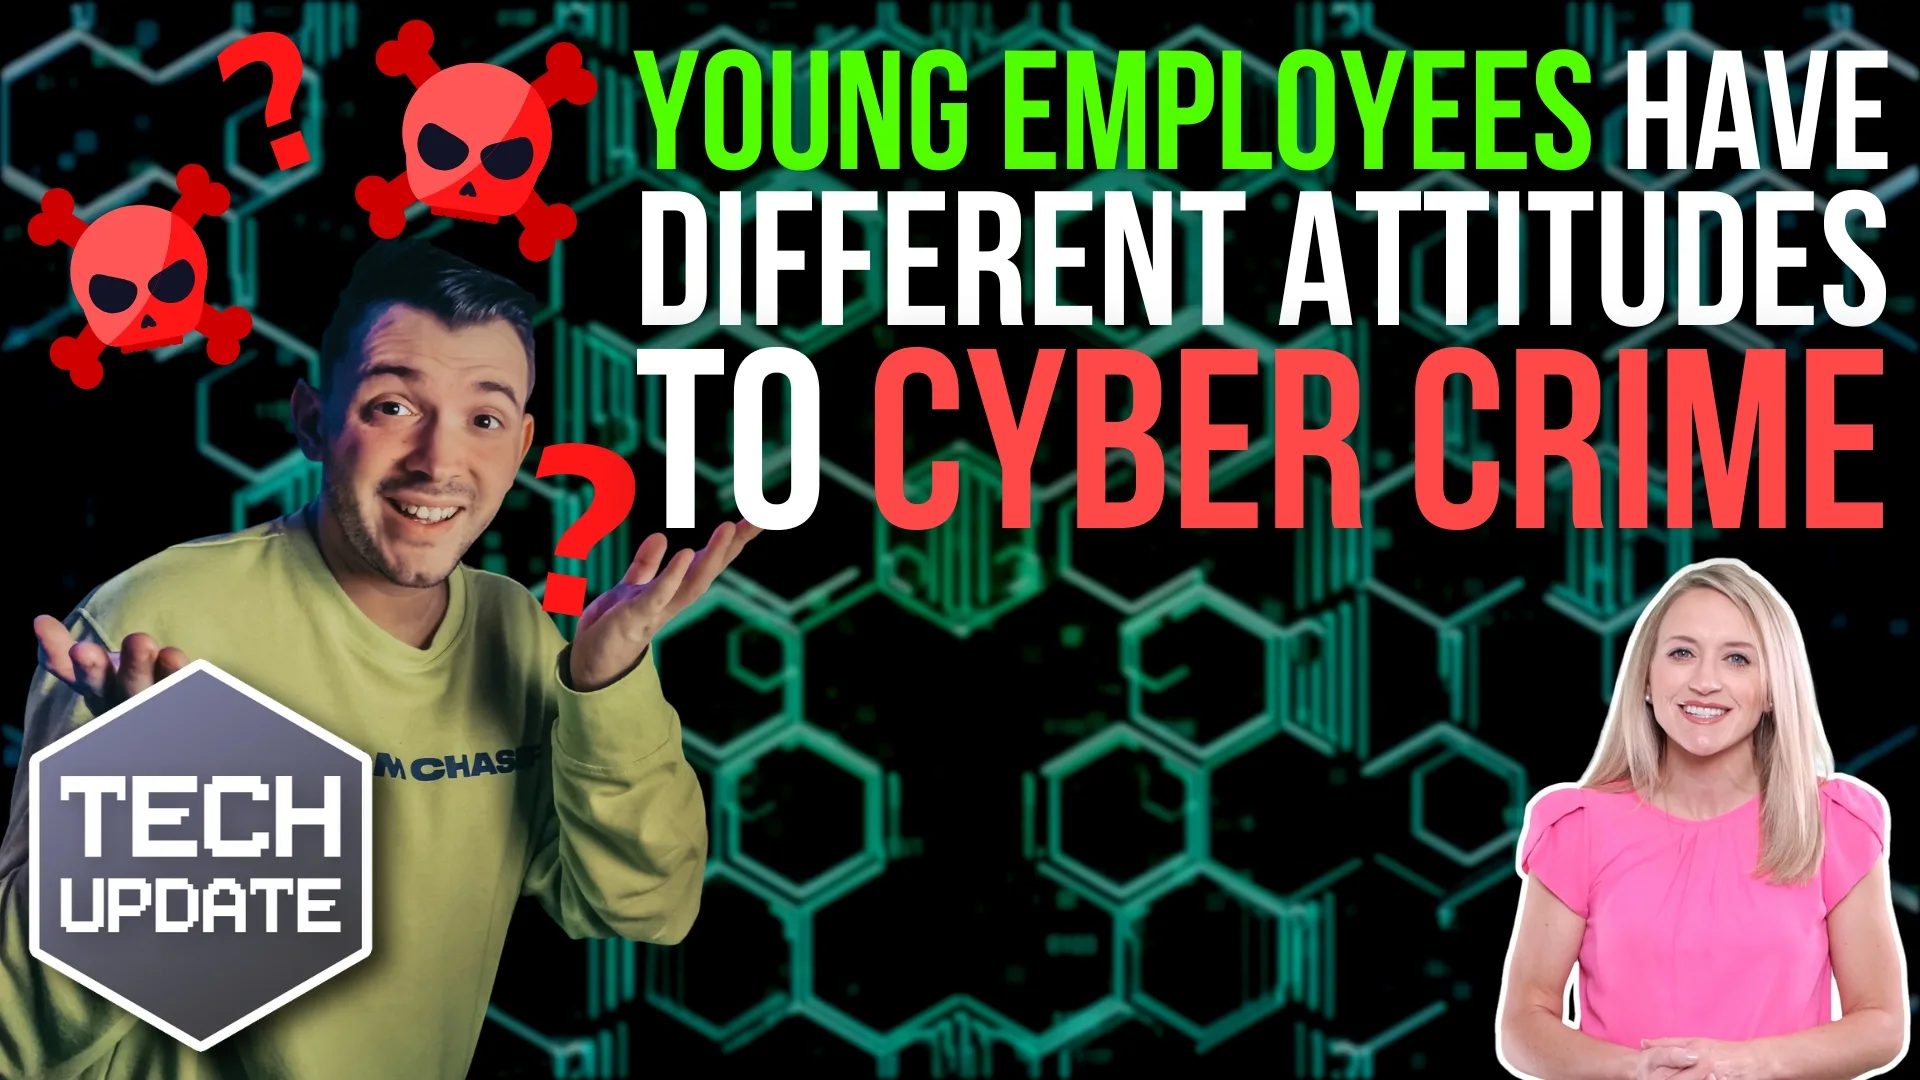 Young employees have different attitudes to cyber crime.